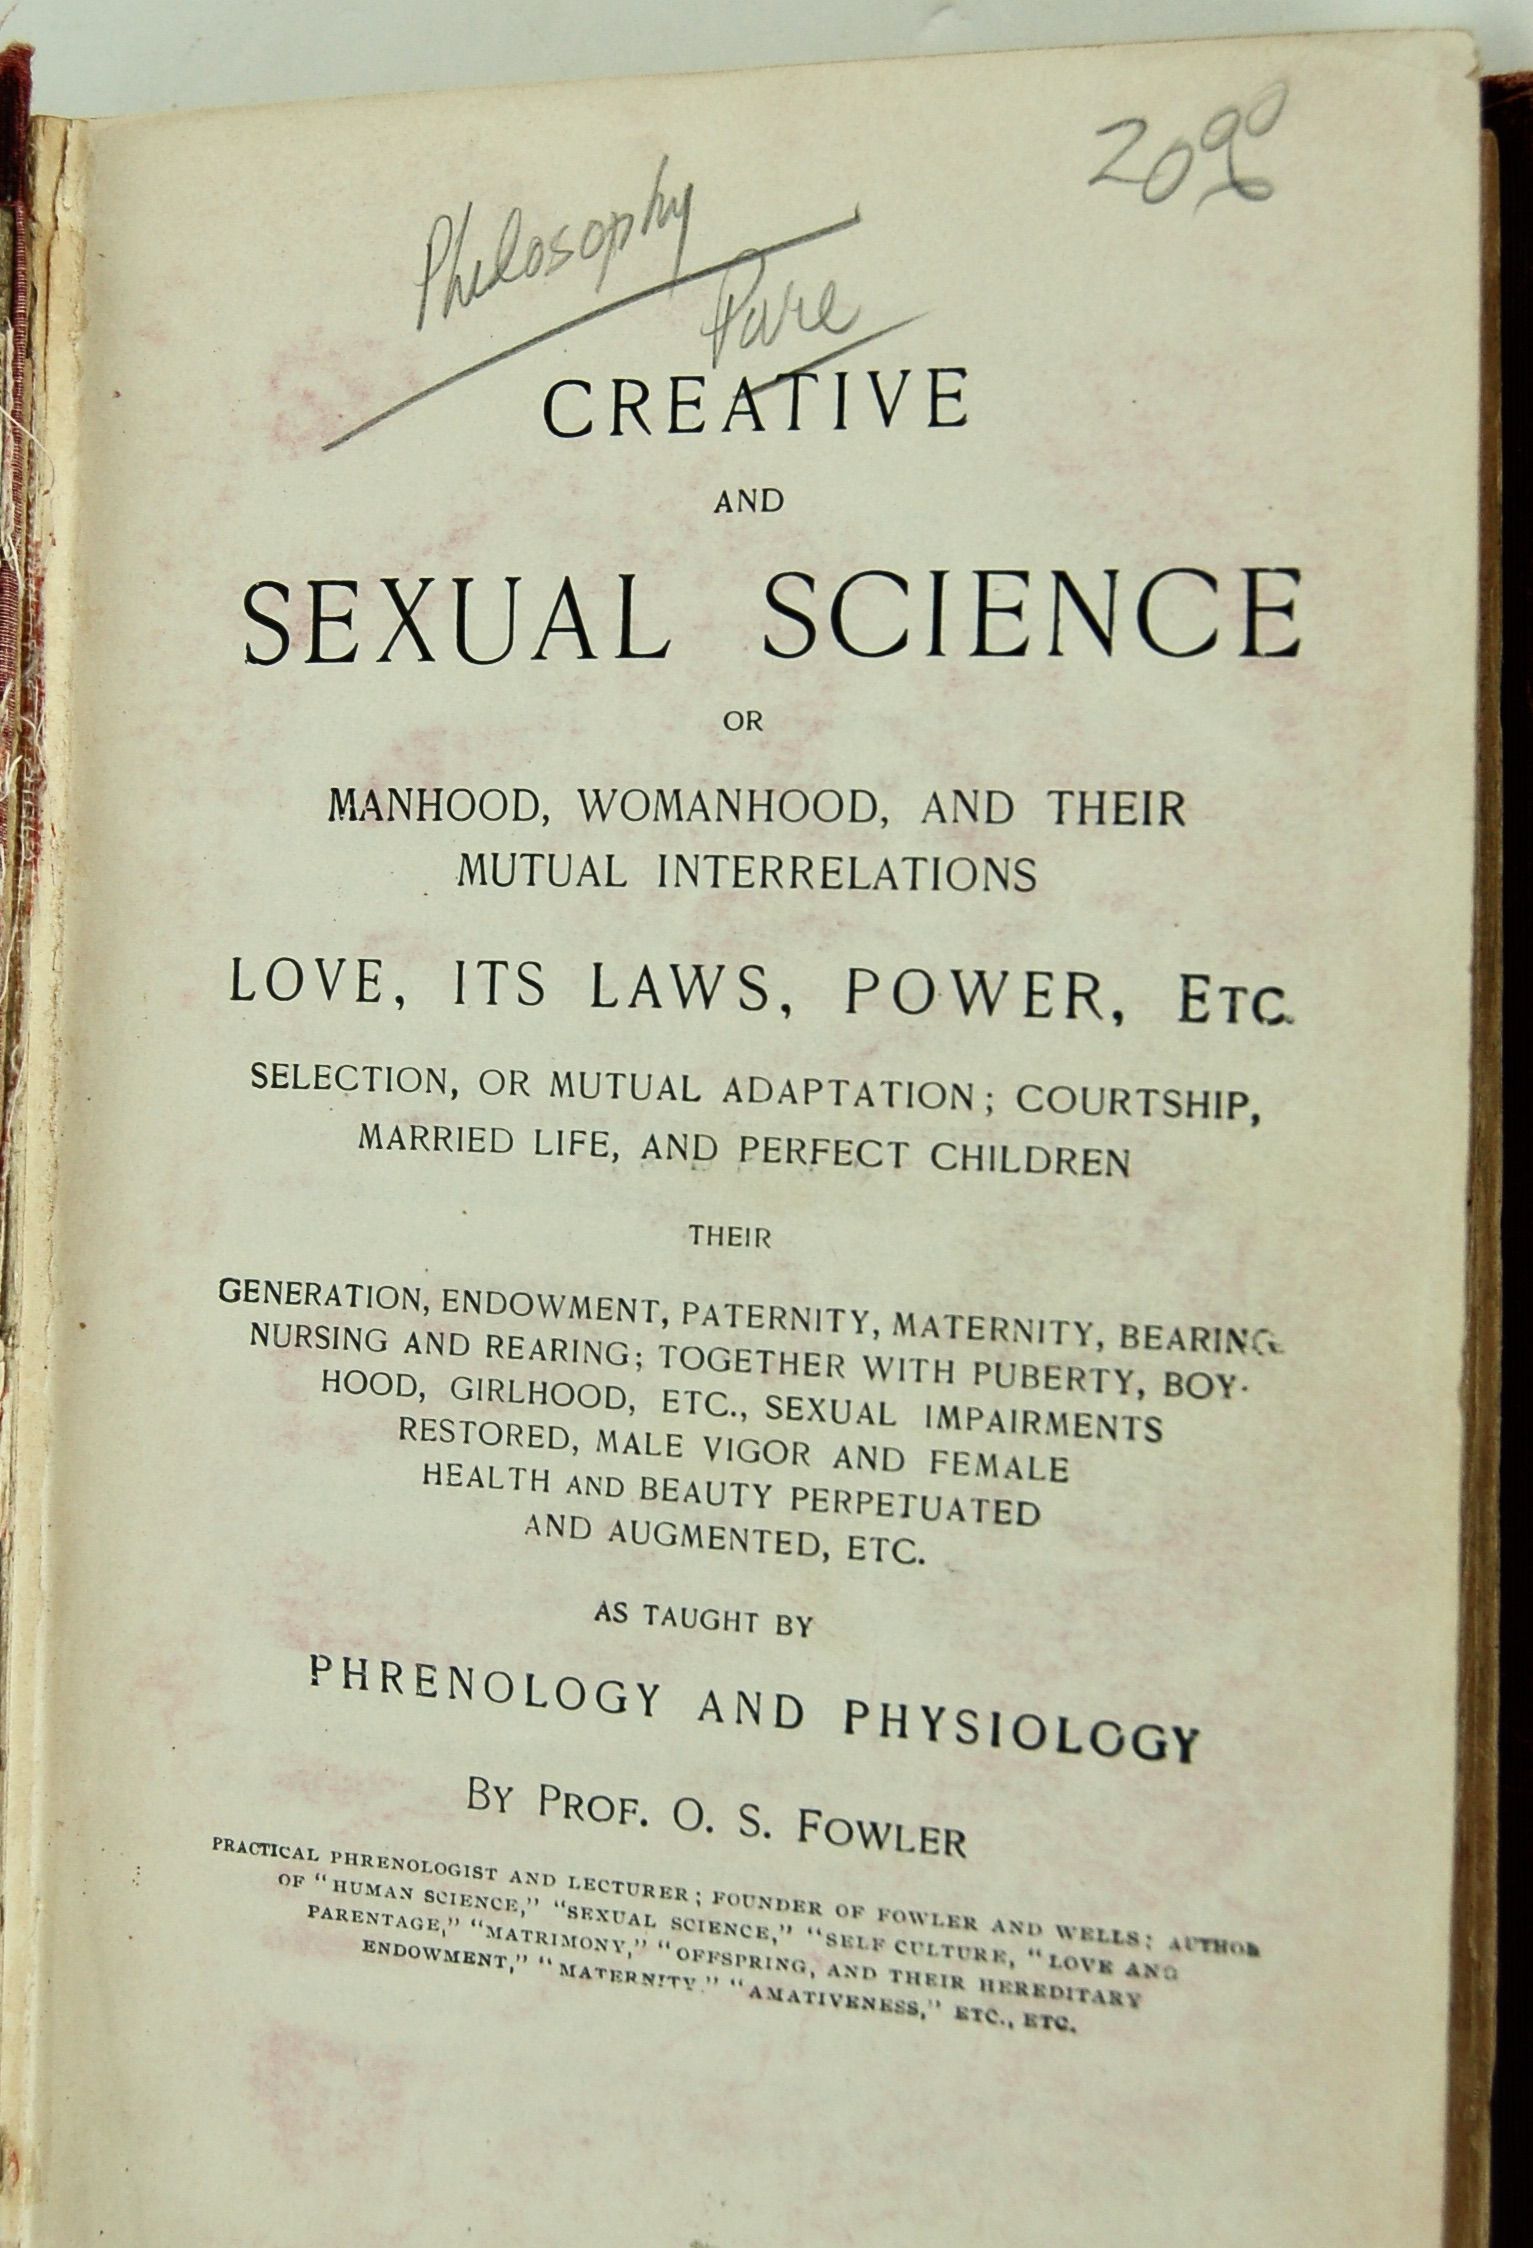  Creative and Sexual Science or Manhood, Womanhood and their Mutual Interrelations… 